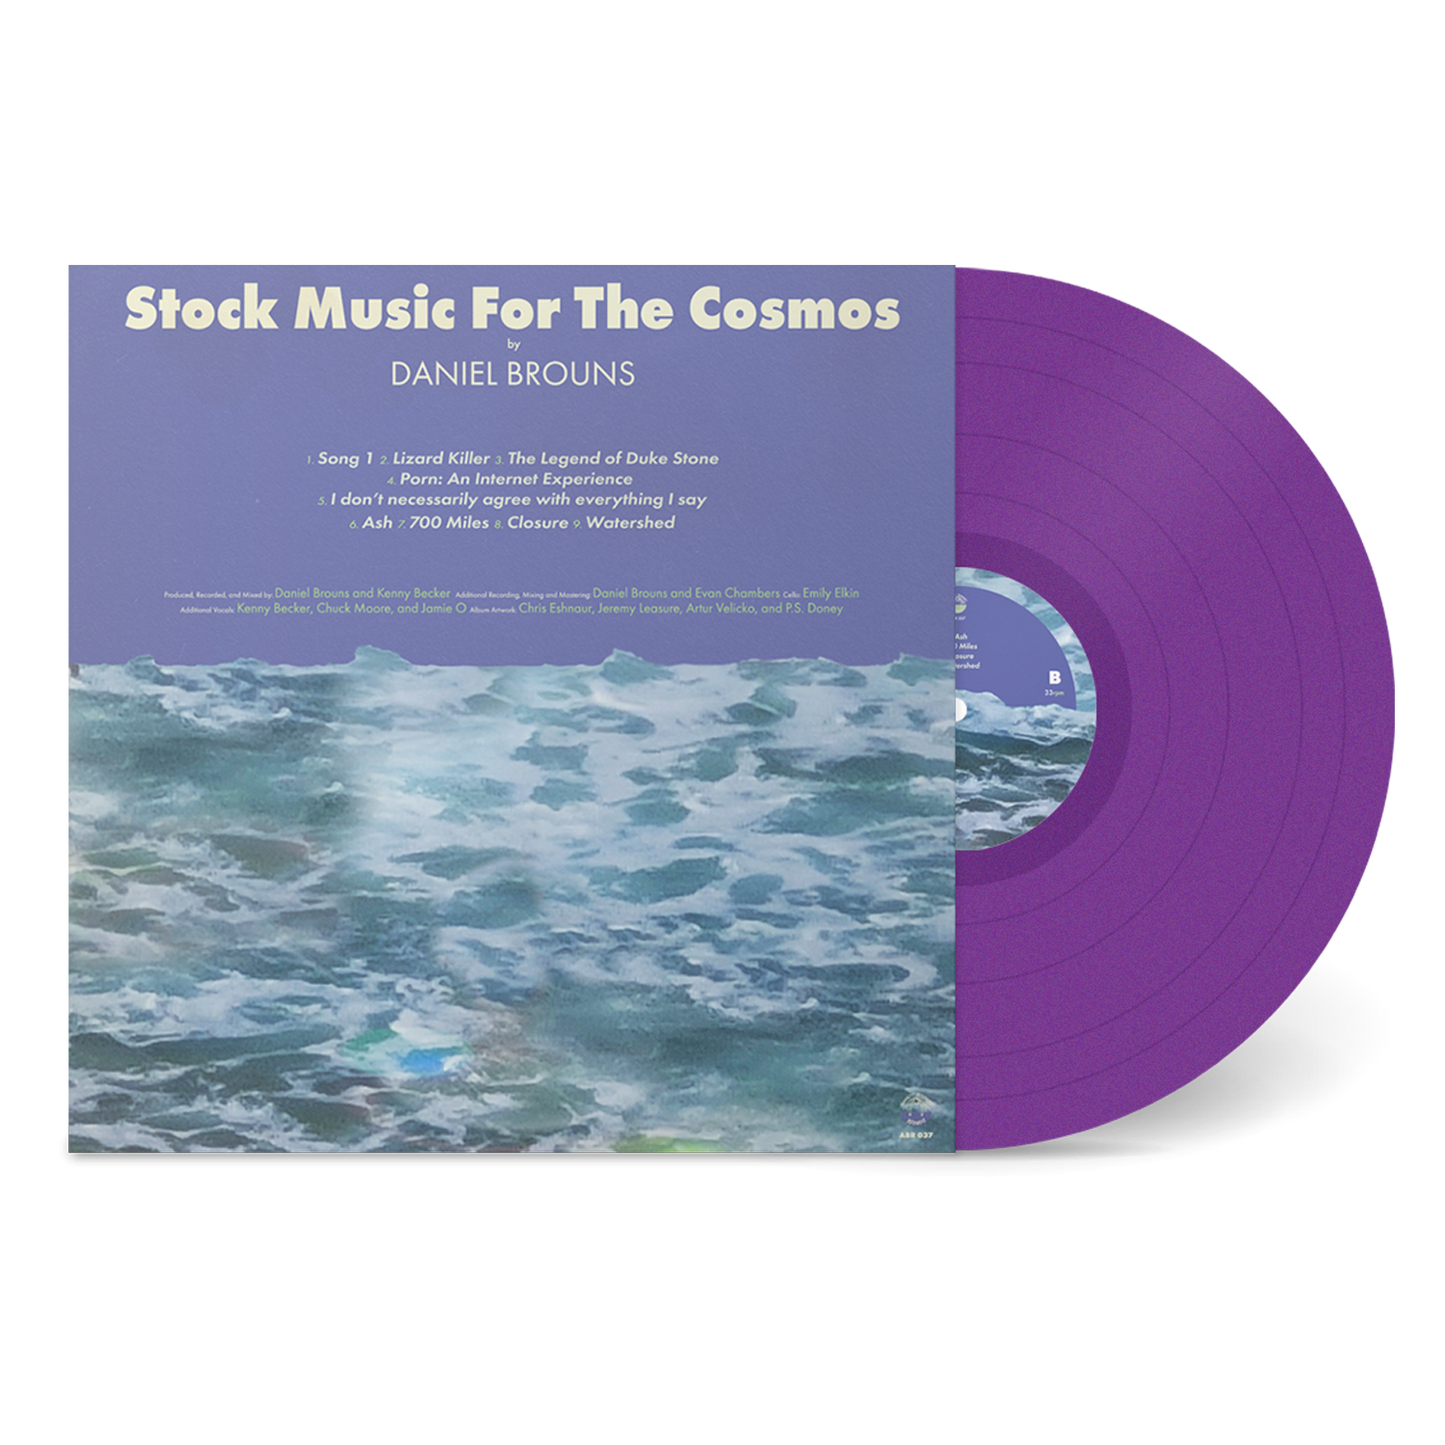 Daniel Brouns - “Stock Music For The Cosmos”